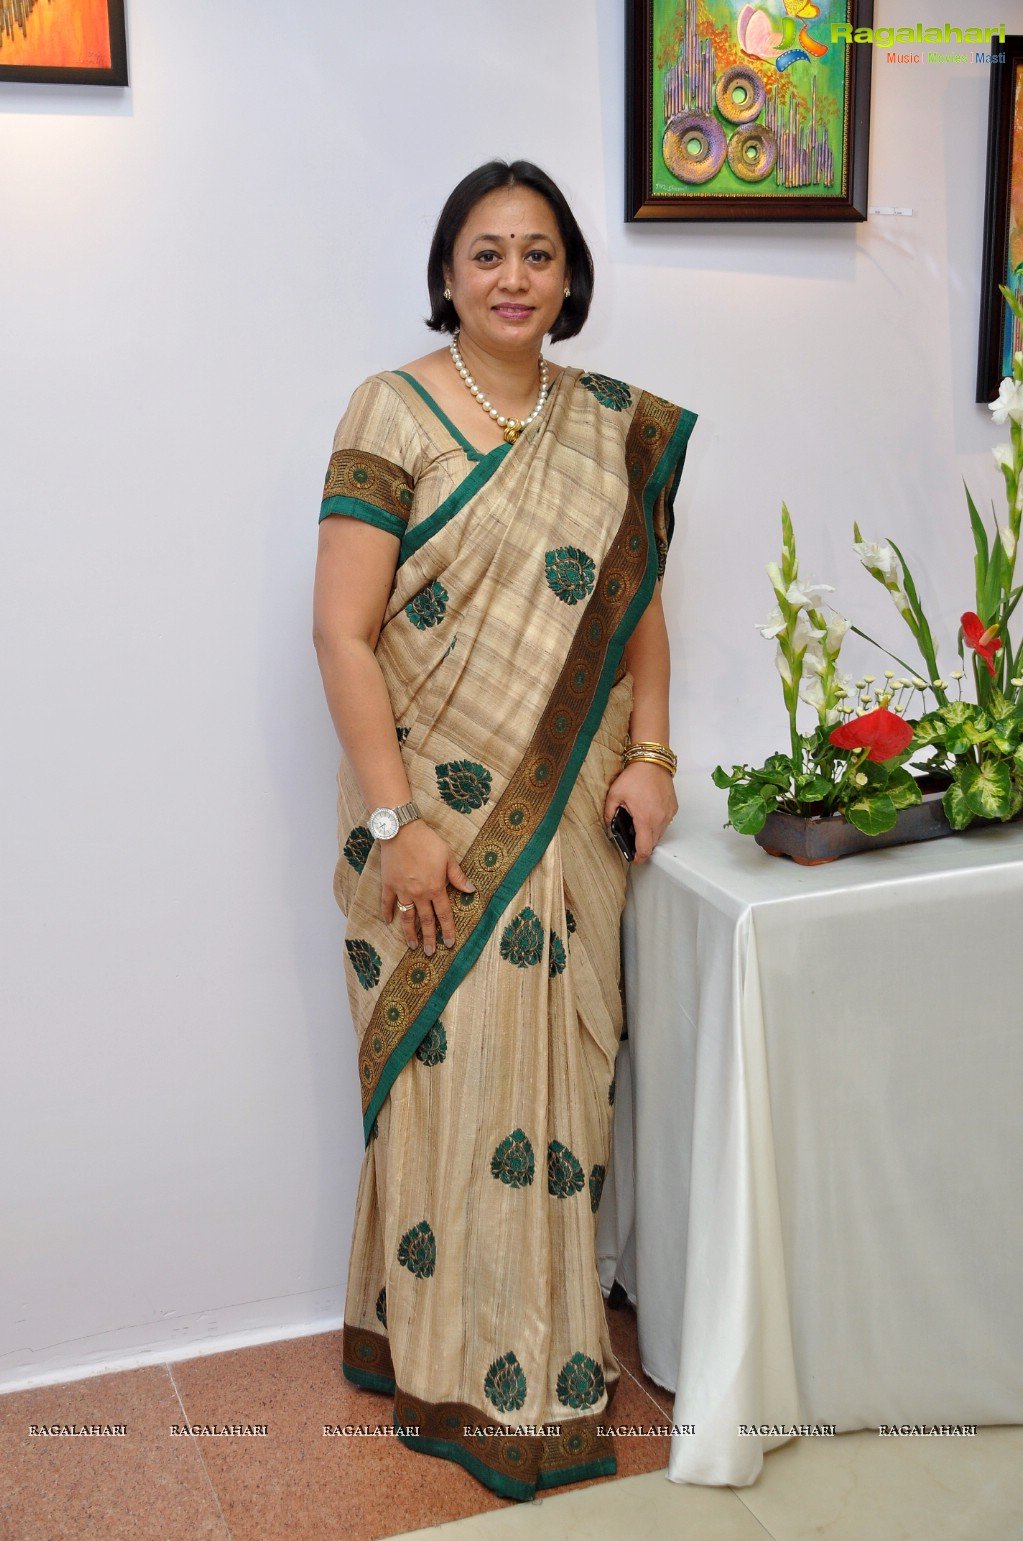 A Pause for Passion Painting Exhibition by Mrs. Sharmila Agarwal